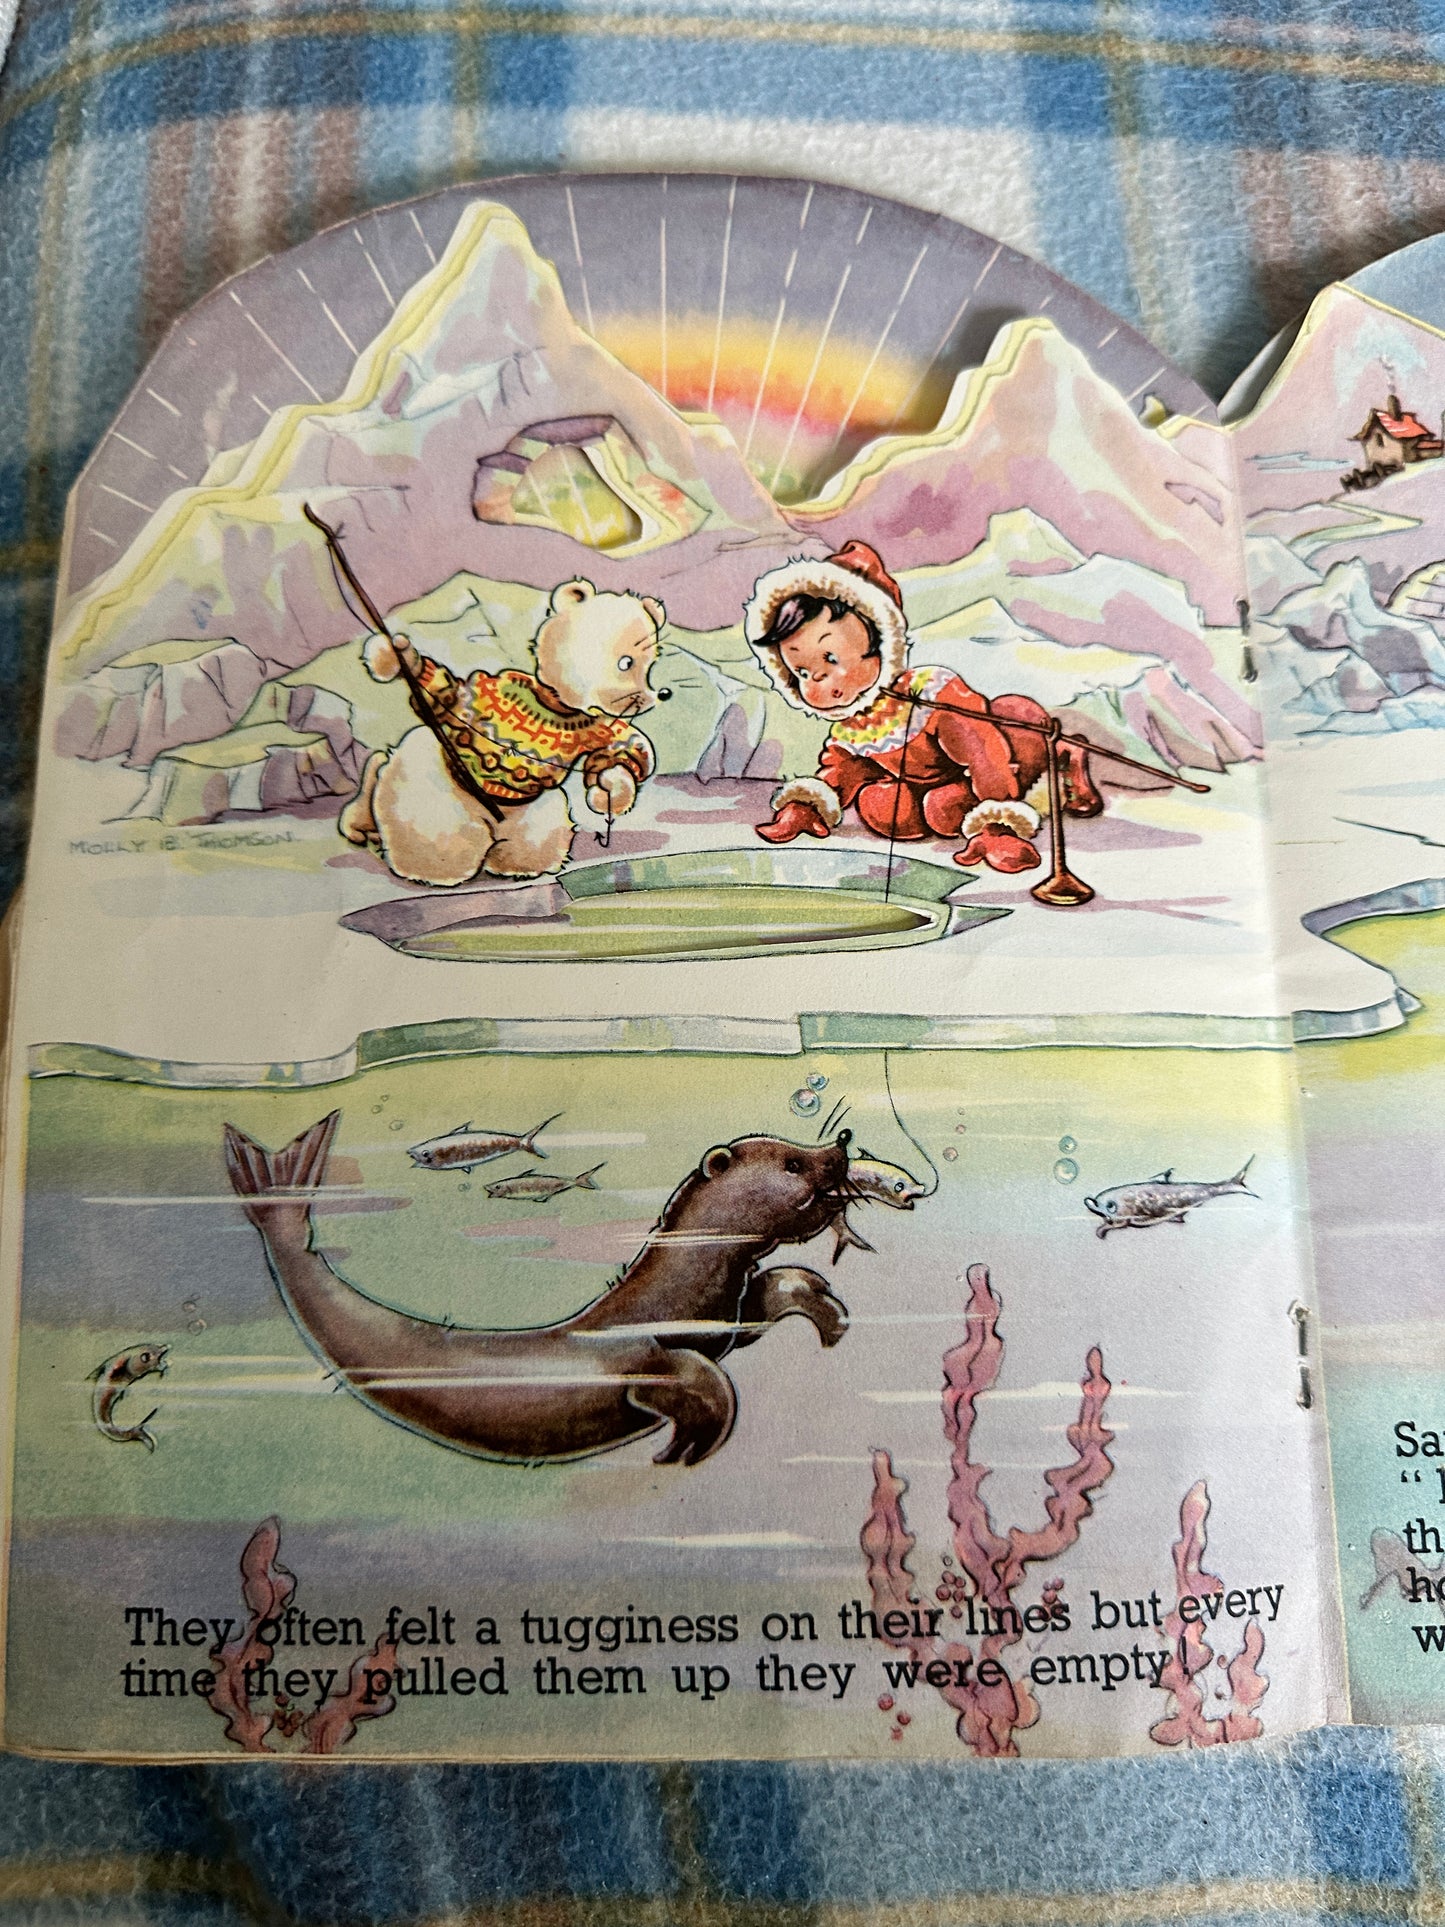 1950’s Fun In The Frozen North(Kiddie Kut Book) Molly B. Thomson(Collins Clear-Type)